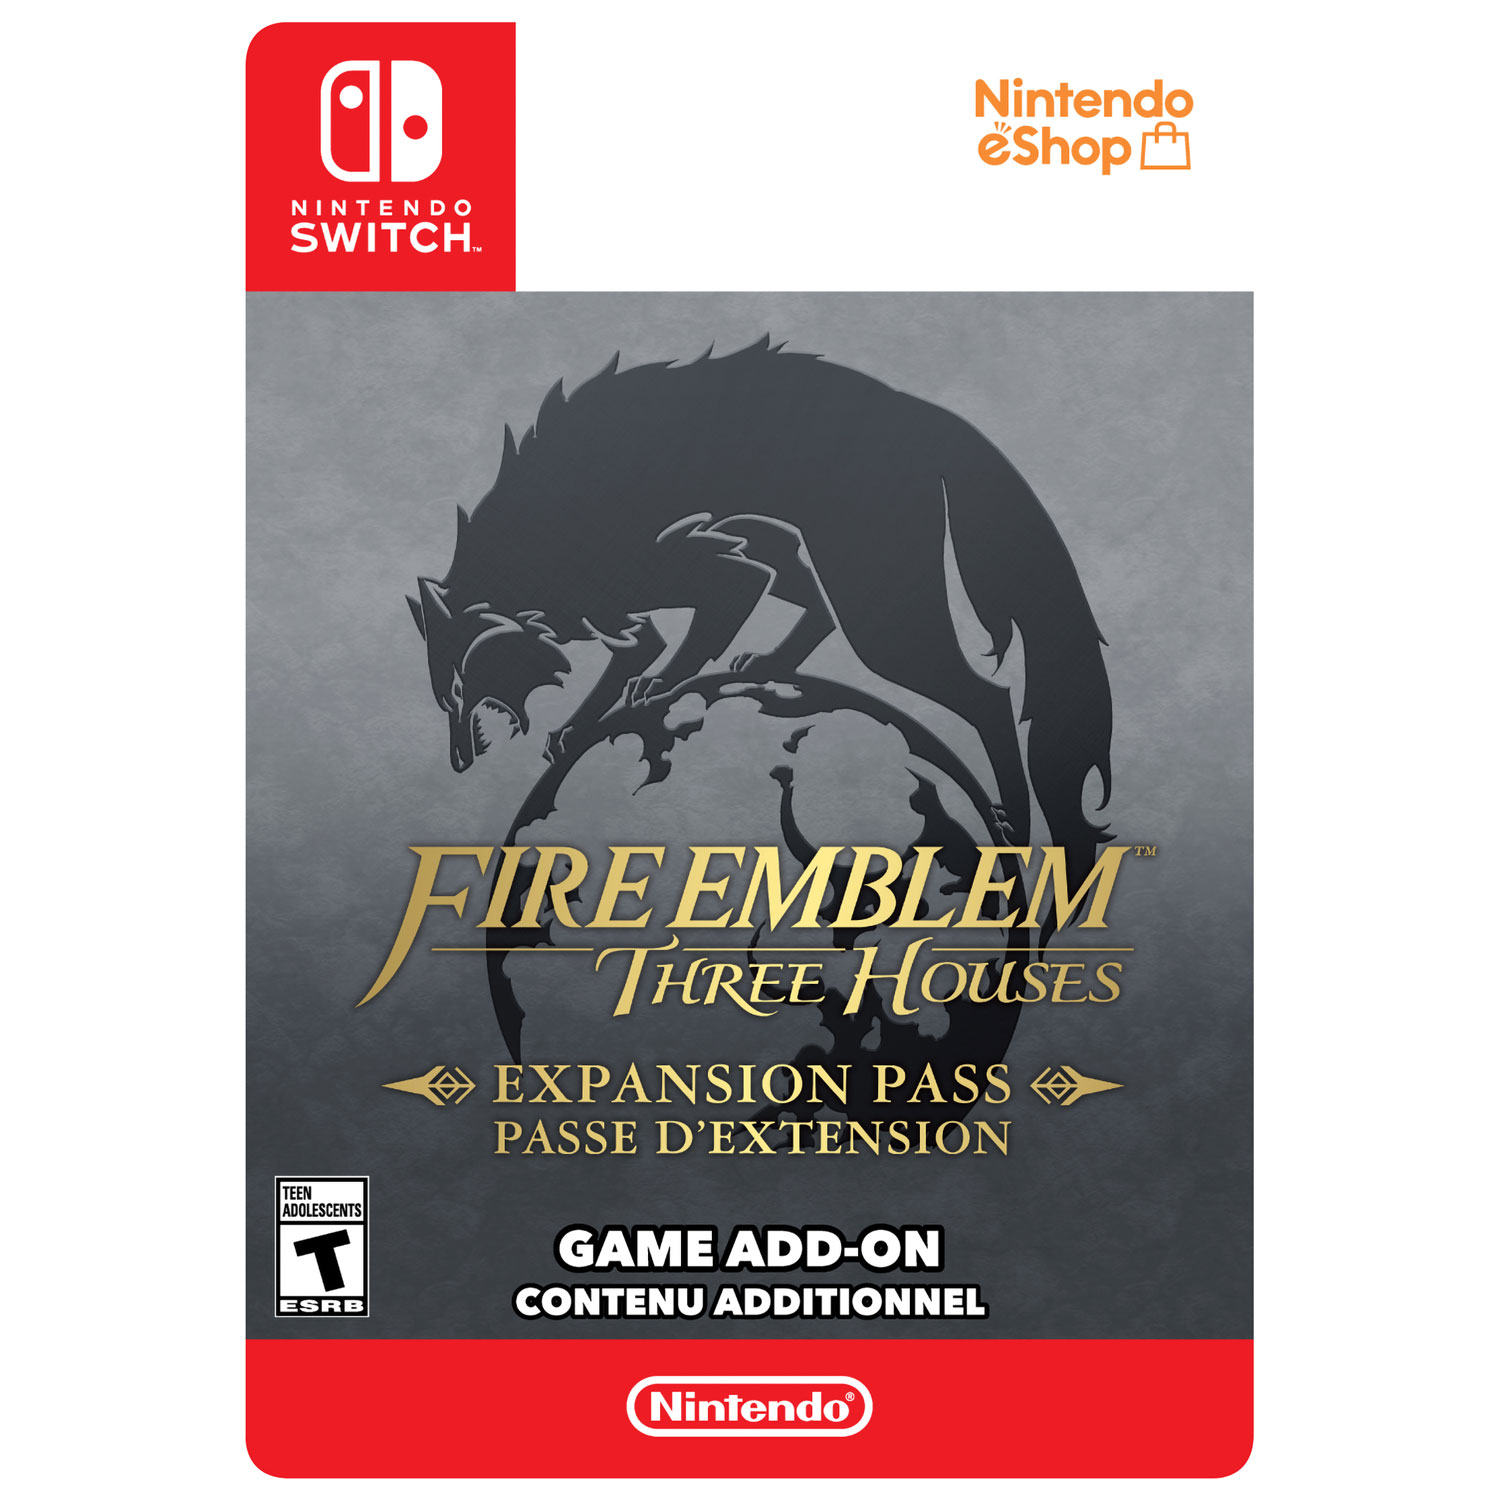 Fire Emblem: Three Houses Expansion Pass (Switch) - Digital Download